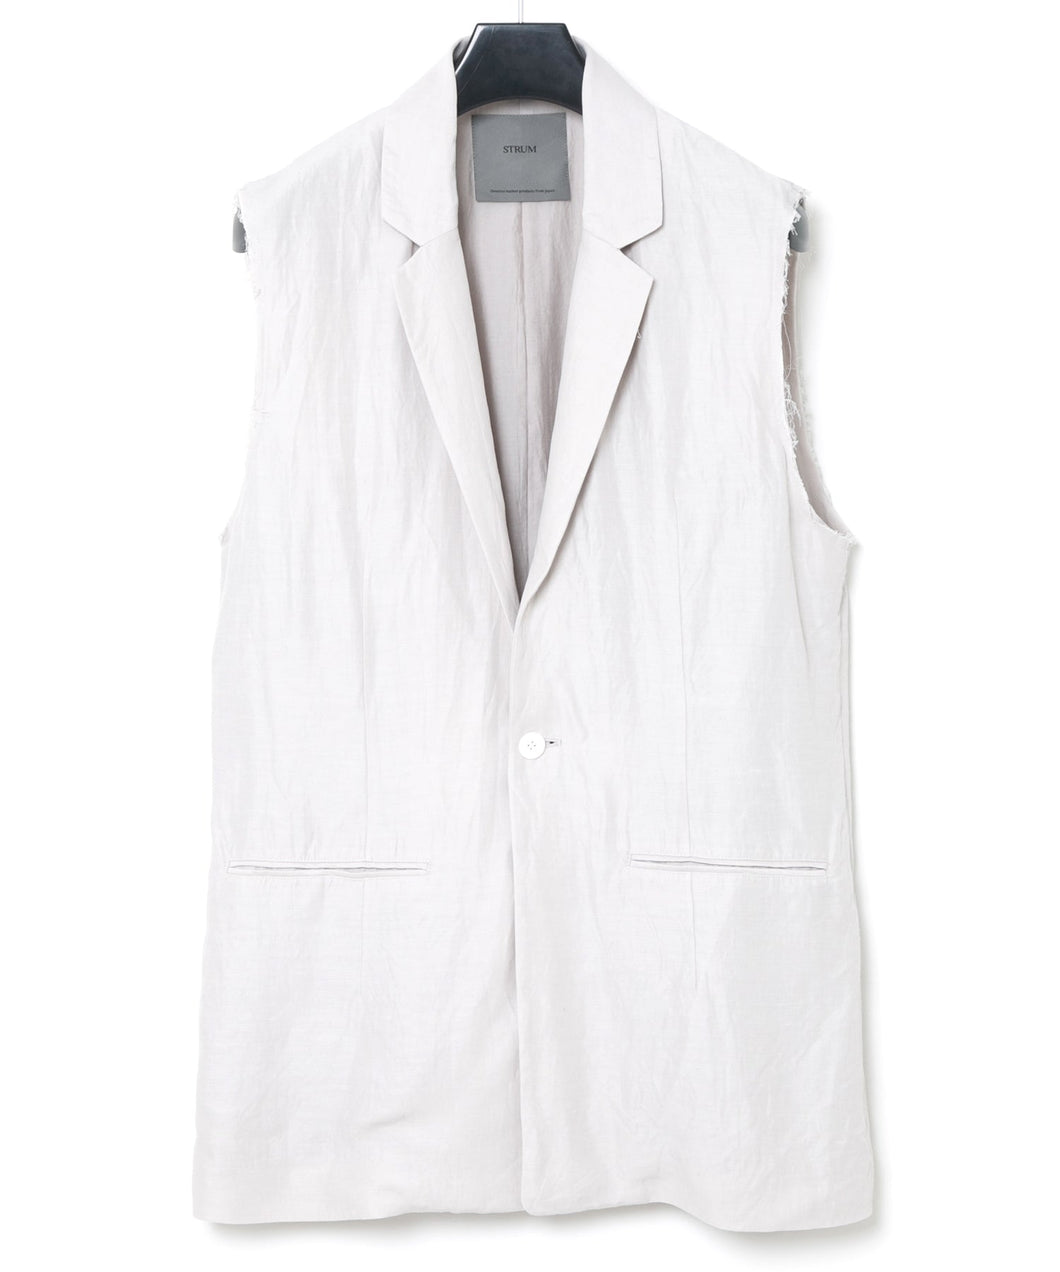 Washer Dyed Rayon&Linen Cloth Tailored Vest - ASH